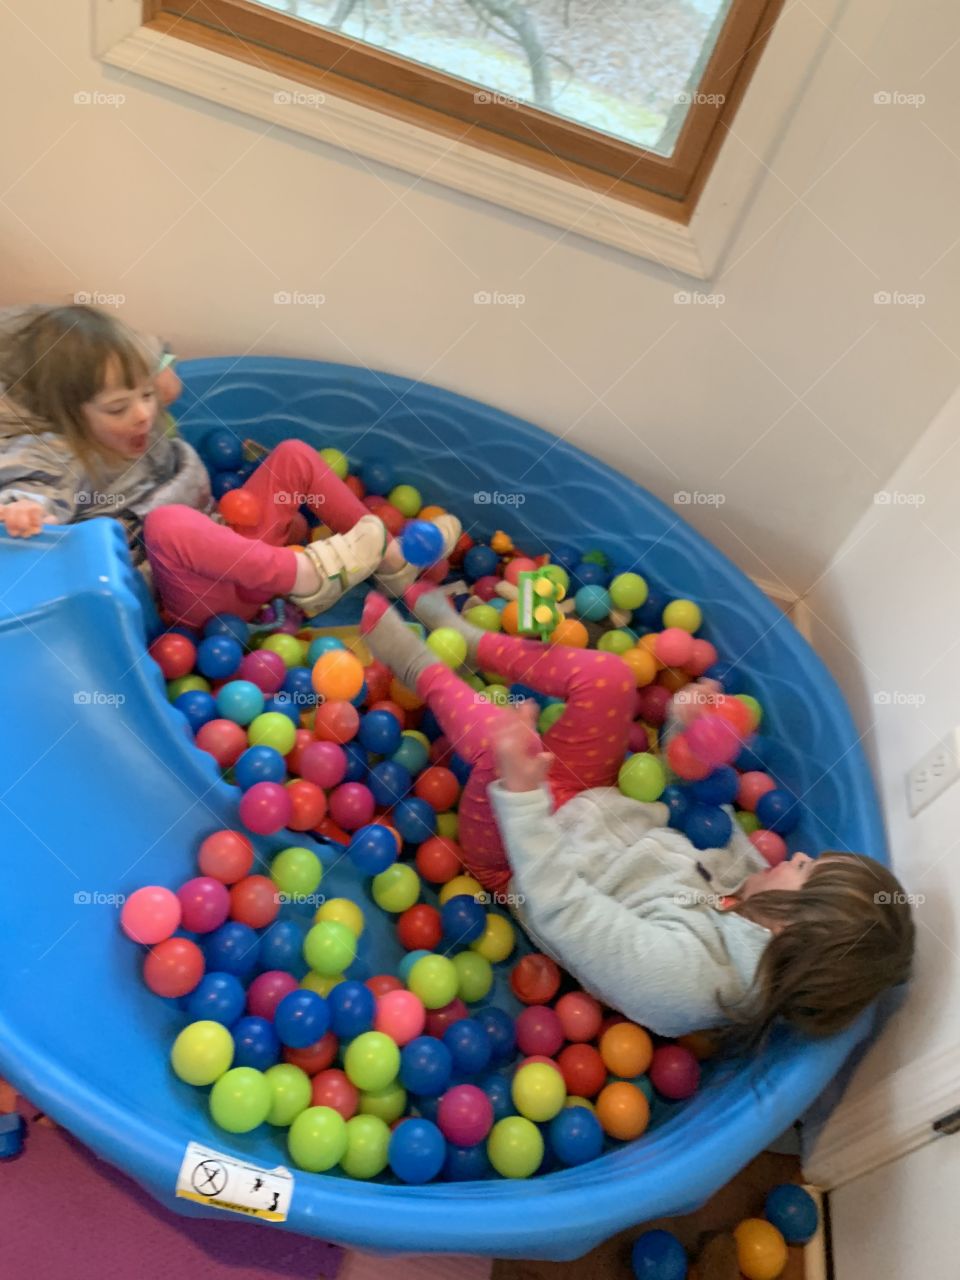 Biological sisters with Down syndrome in ball pit